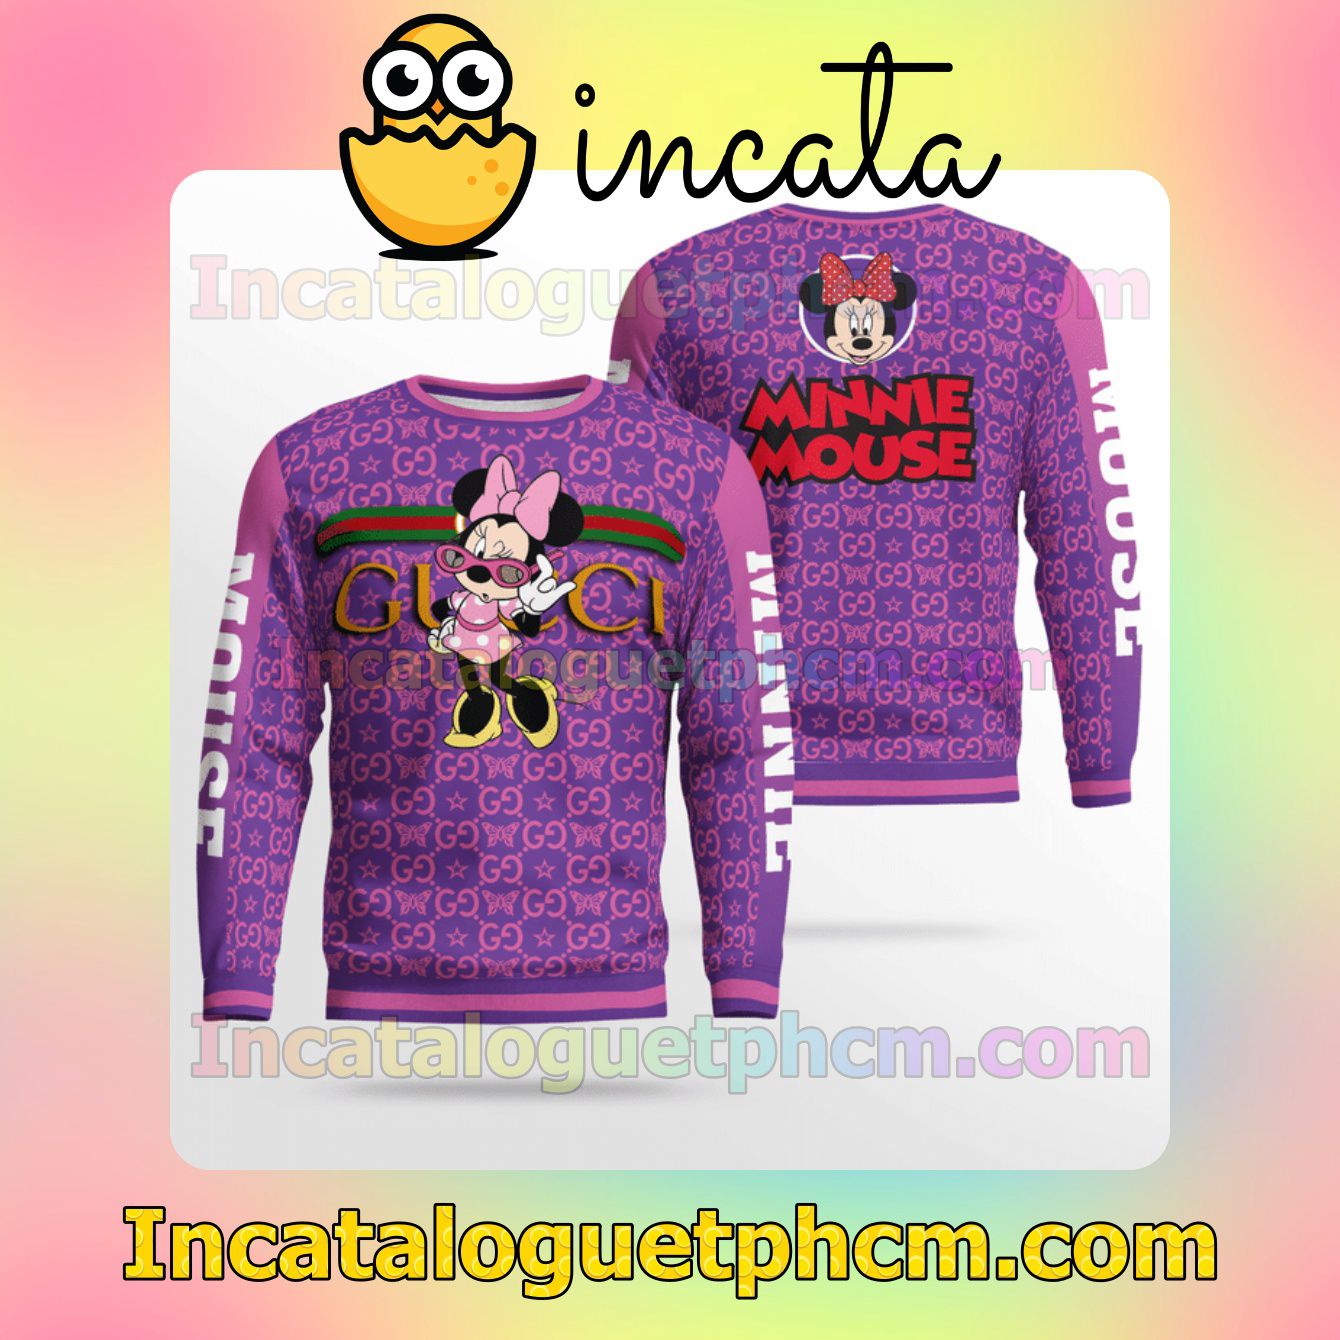 Gucci Minnie Mouse Butterfly Purple Wool Sweater Sweatshirt Gift For Mom